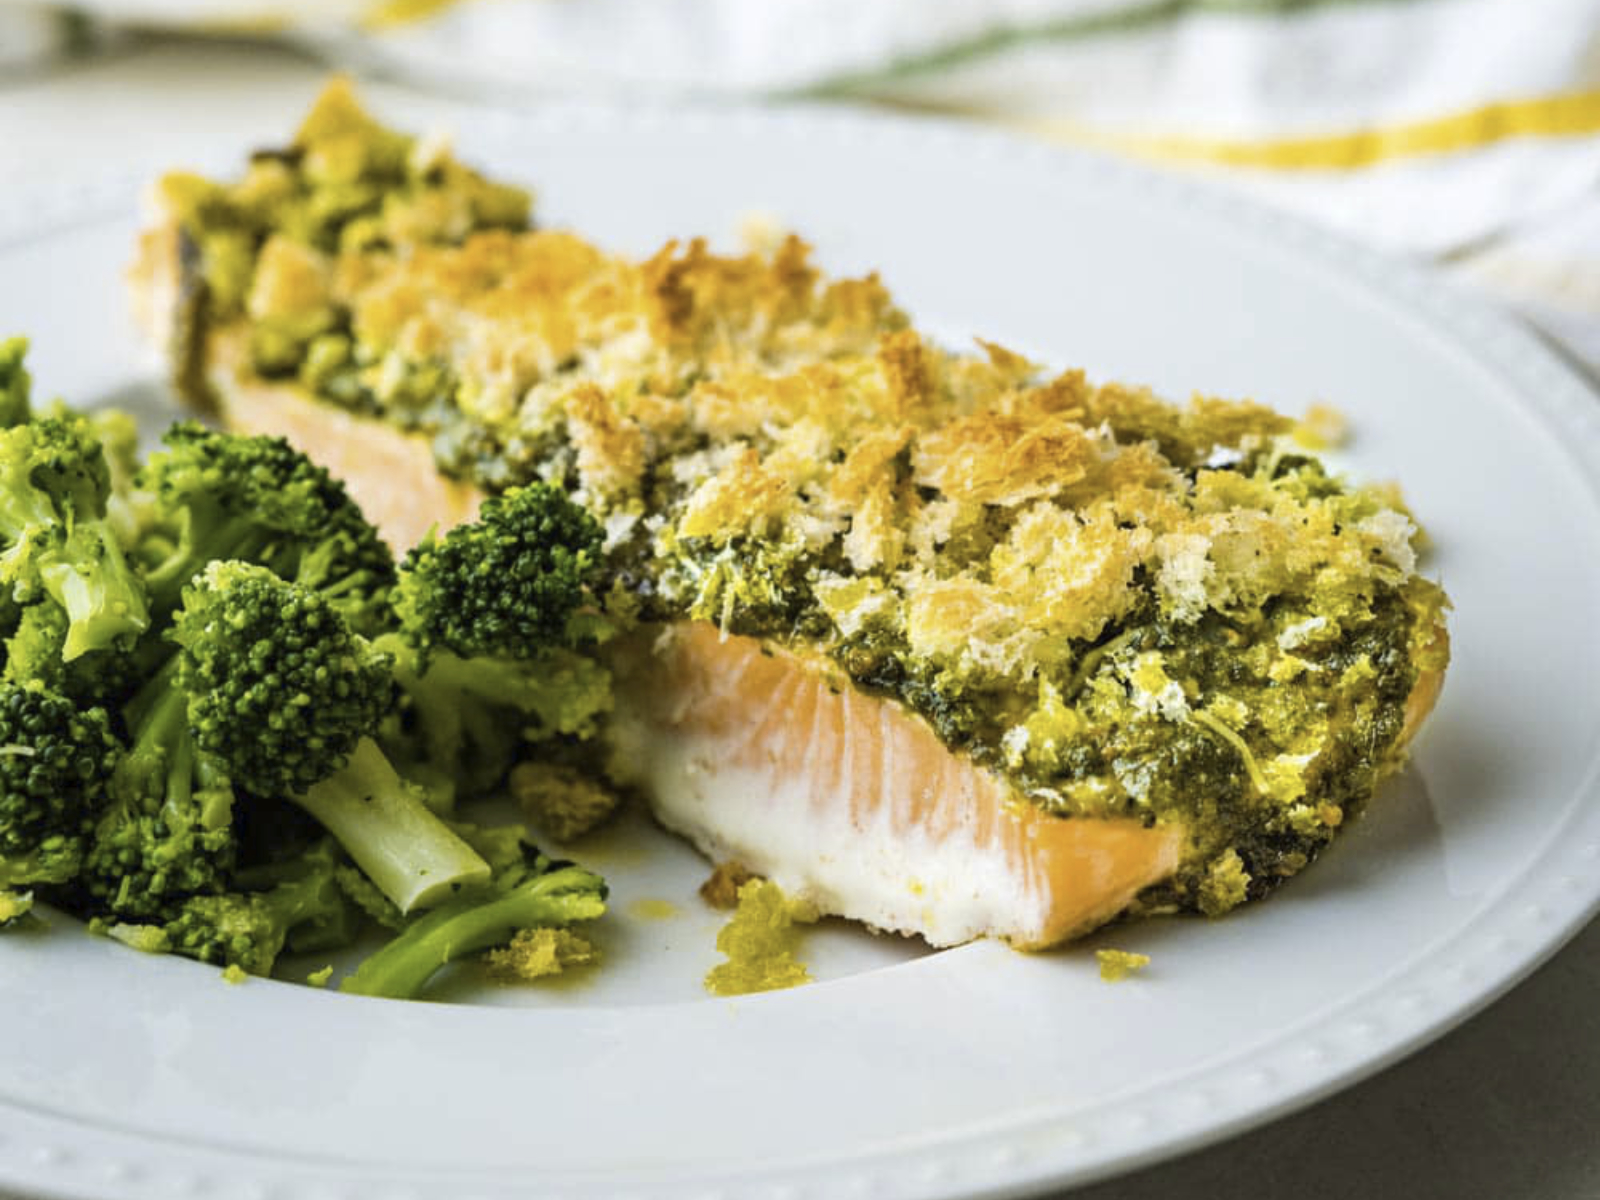 pesto salmon with crumble and a side of broccoli